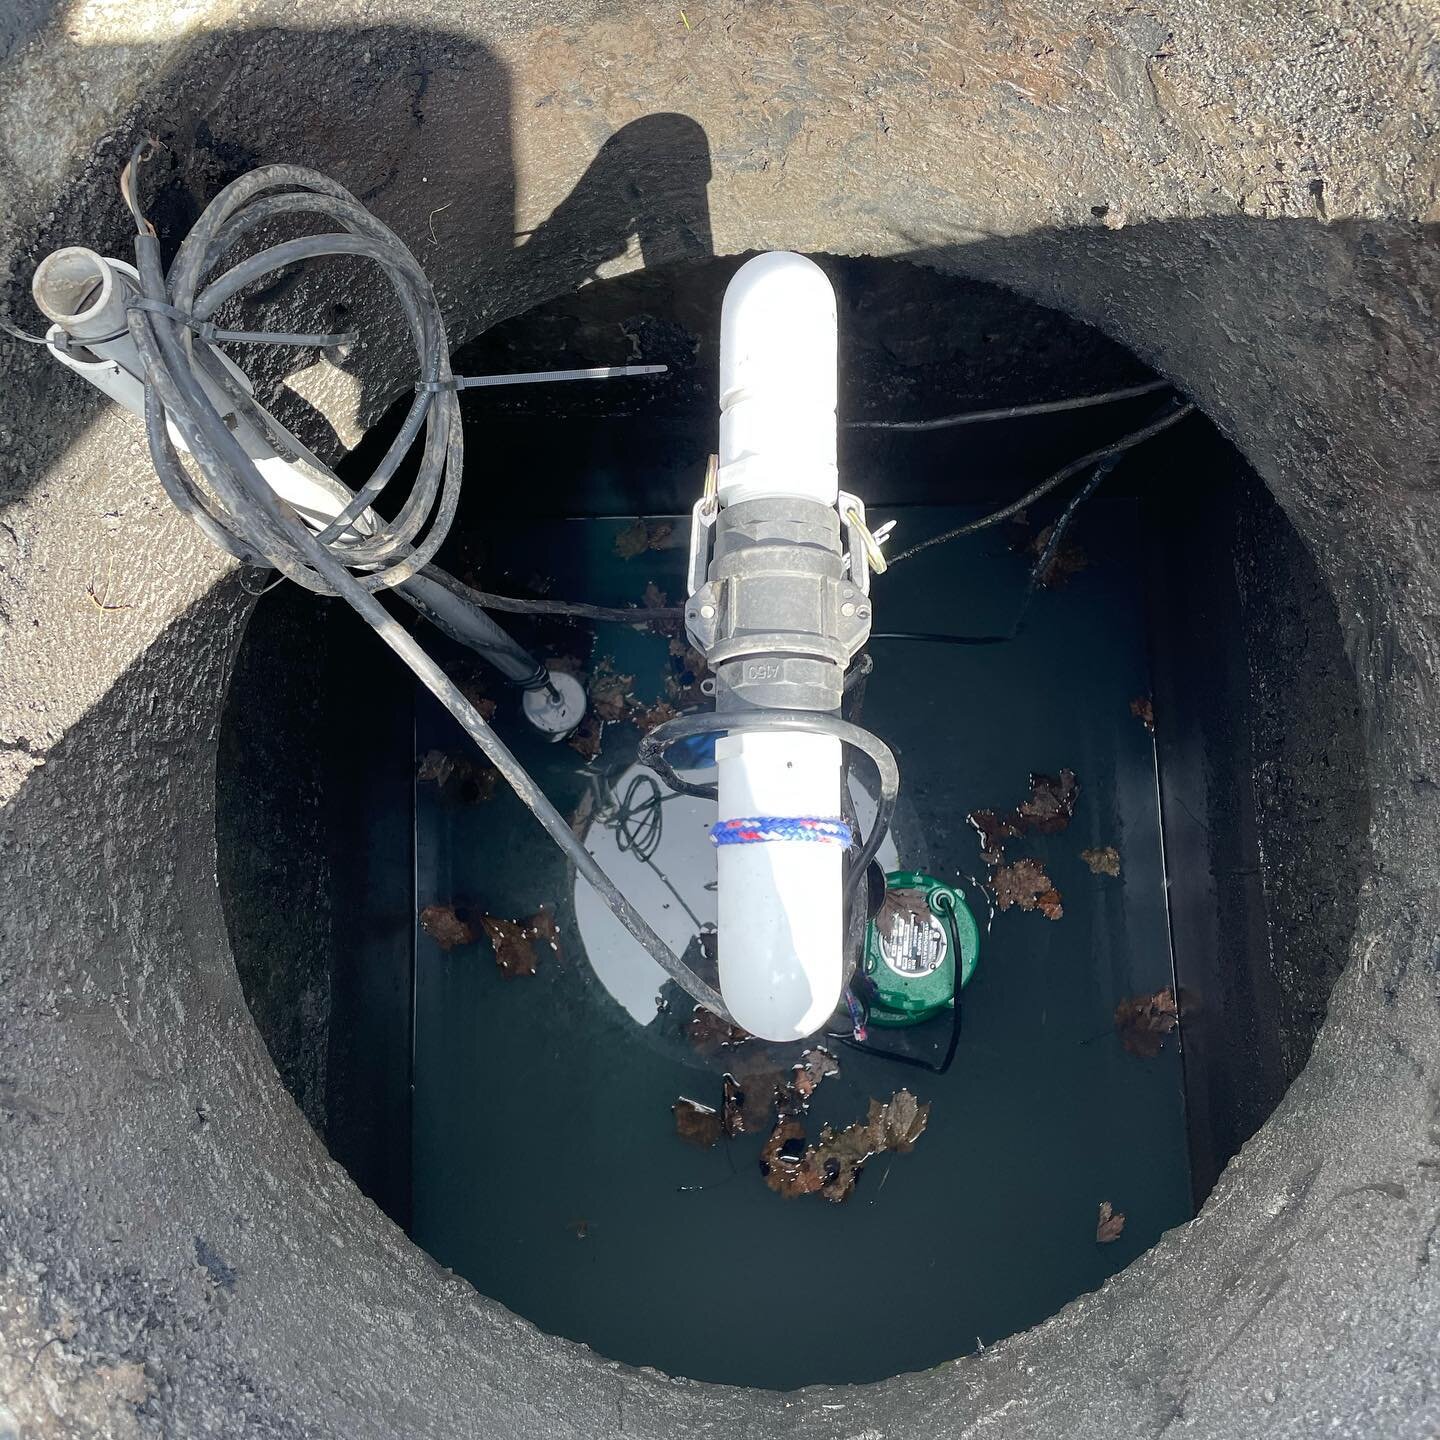 Nothing glamorous, but a job done right! 
&bull;
✅✅✅
&bull;
We added a quick (and accessible) disconnect for easy servicing, plus a float tree to keep the floats untangled. Oh, and our connections will last the test of time. More than marets and elec